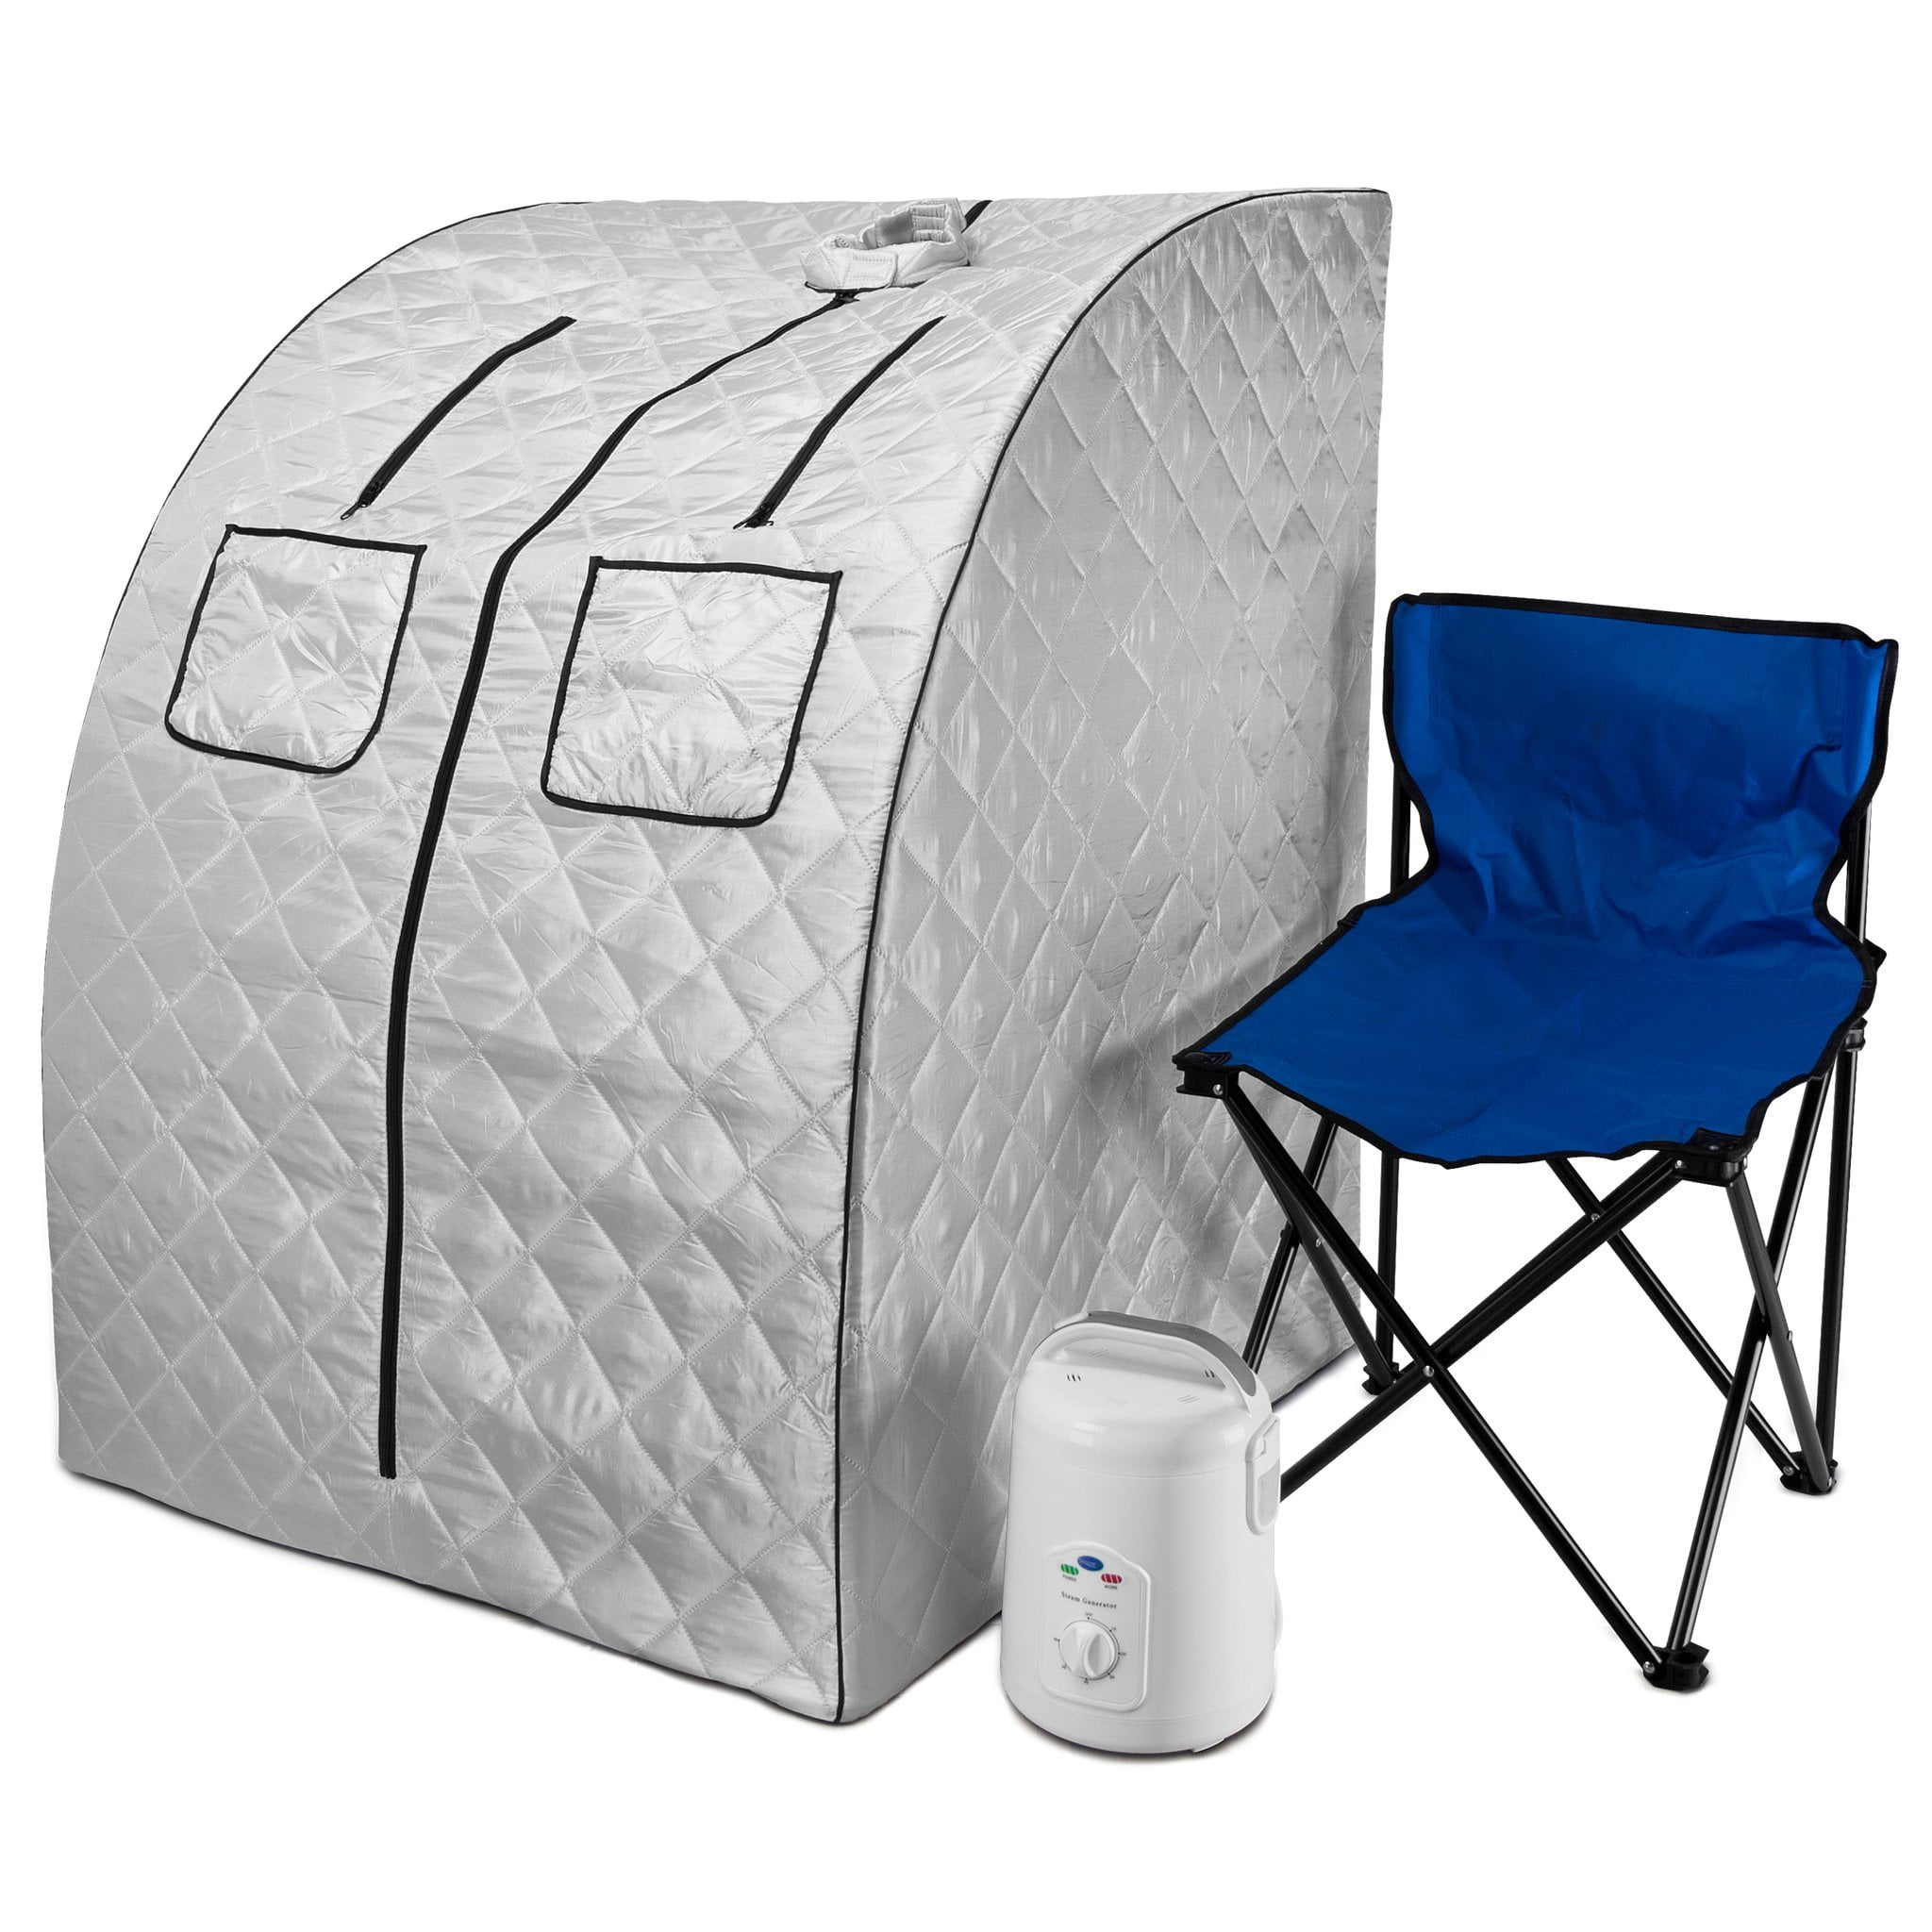 Personal Sauna with 9 Temperature Levels COSTWAY Portable Steam Sauna Detox Relaxation at Home 2L Folding Home Spa Sauna Tent for Weight Loss Foldable Chair Timer Remote Control Gray